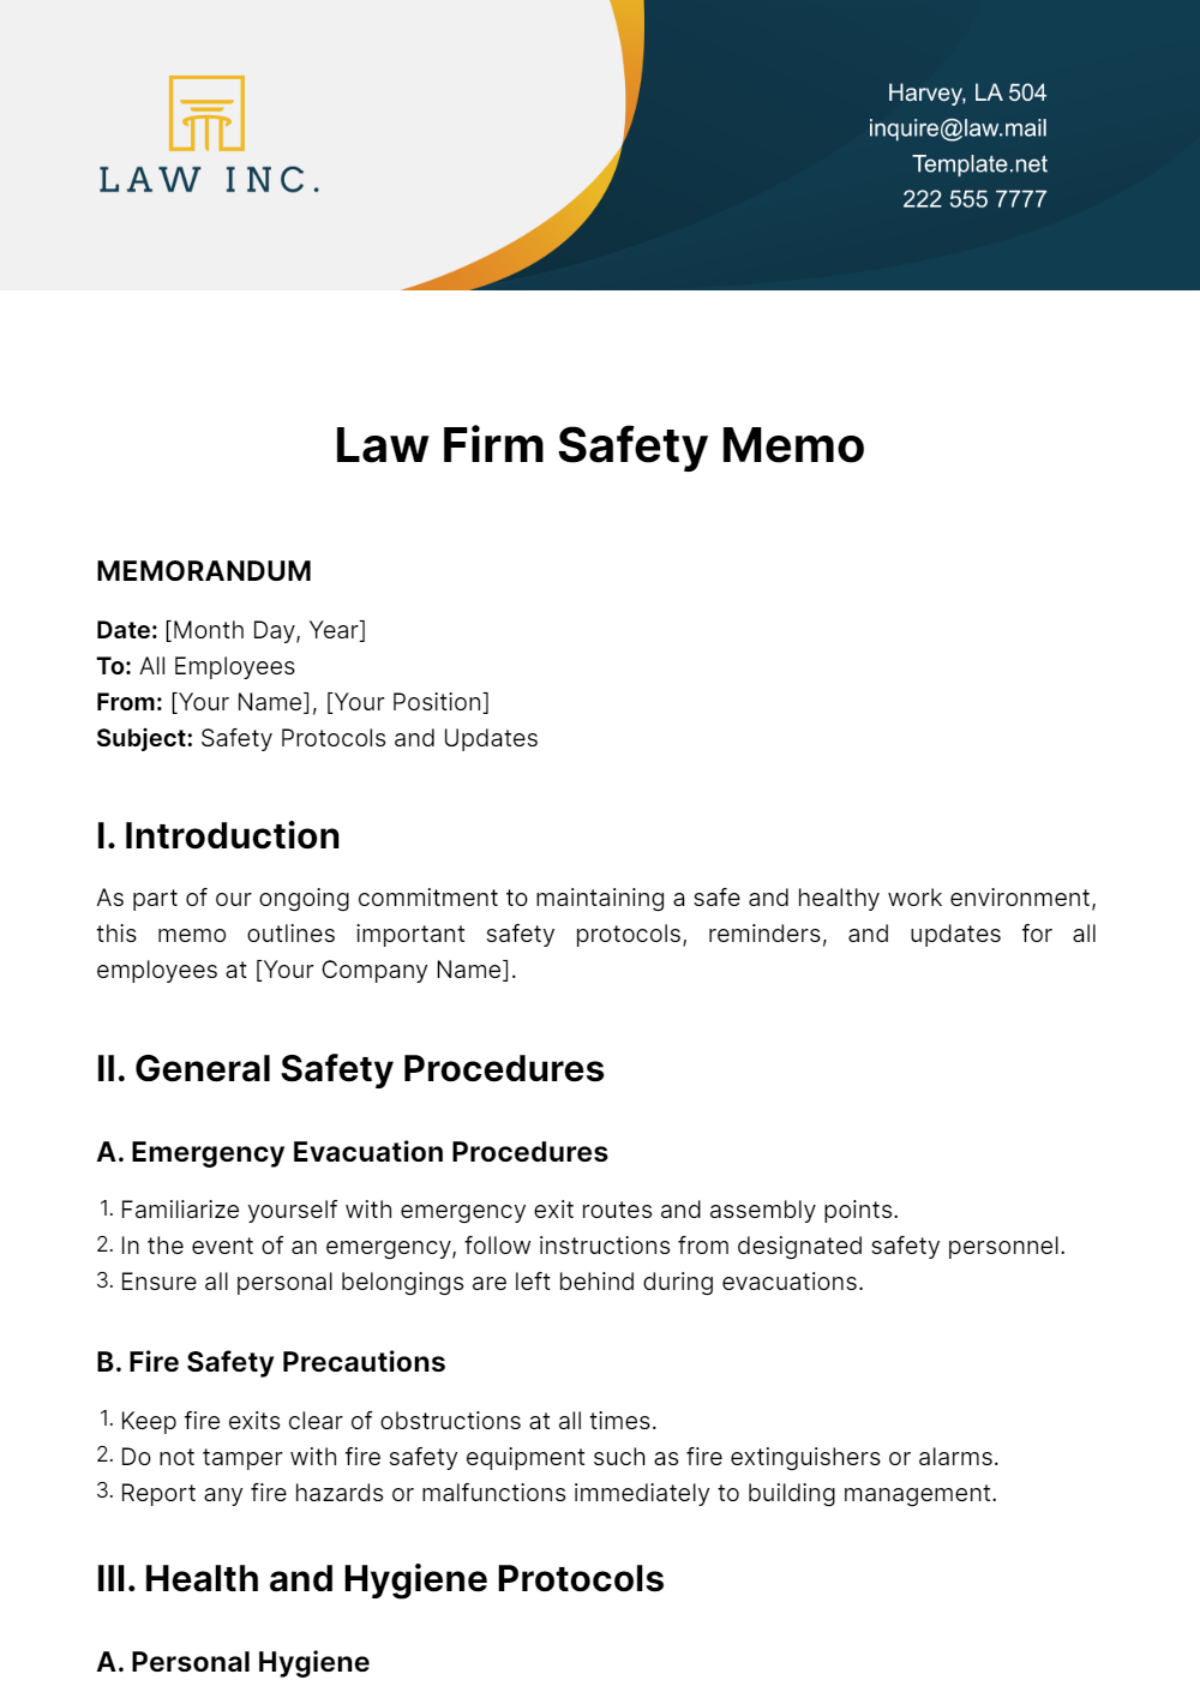 Law Firm Safety Memo Template